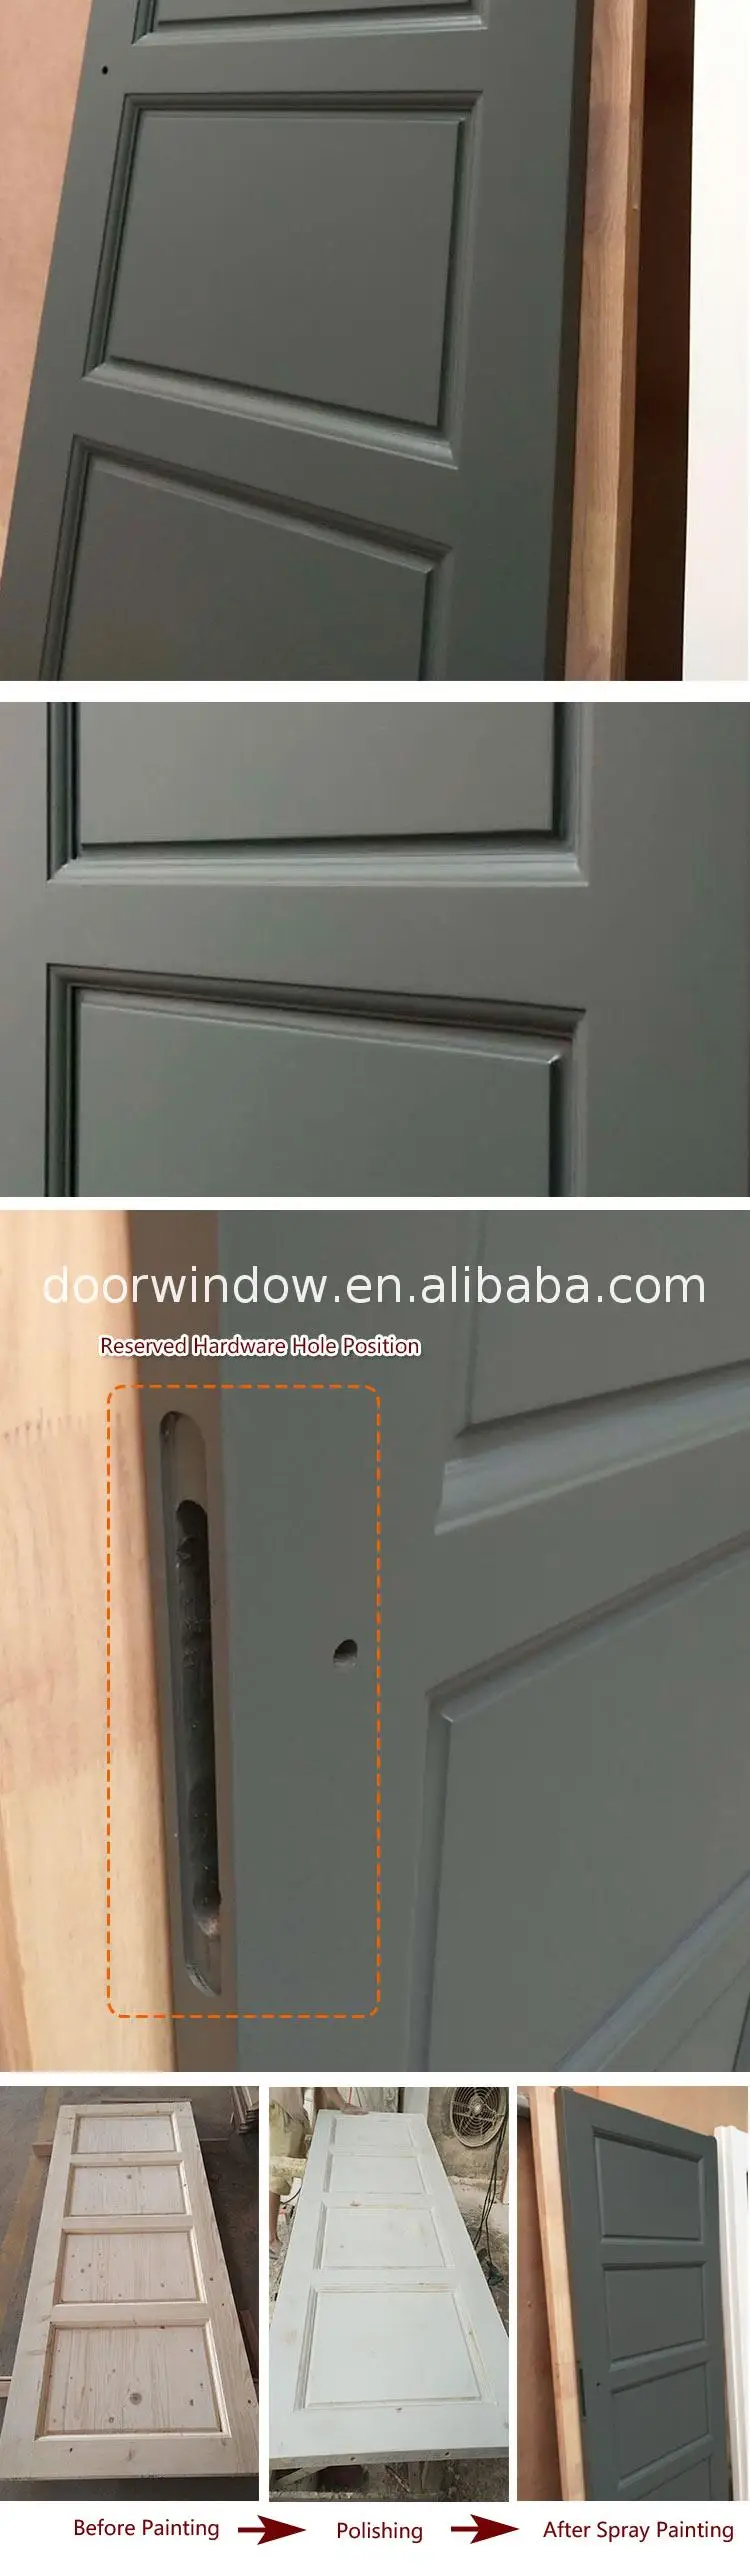 China Big Factory Good Price outside wooden doors for sale new design and windows modern pictures